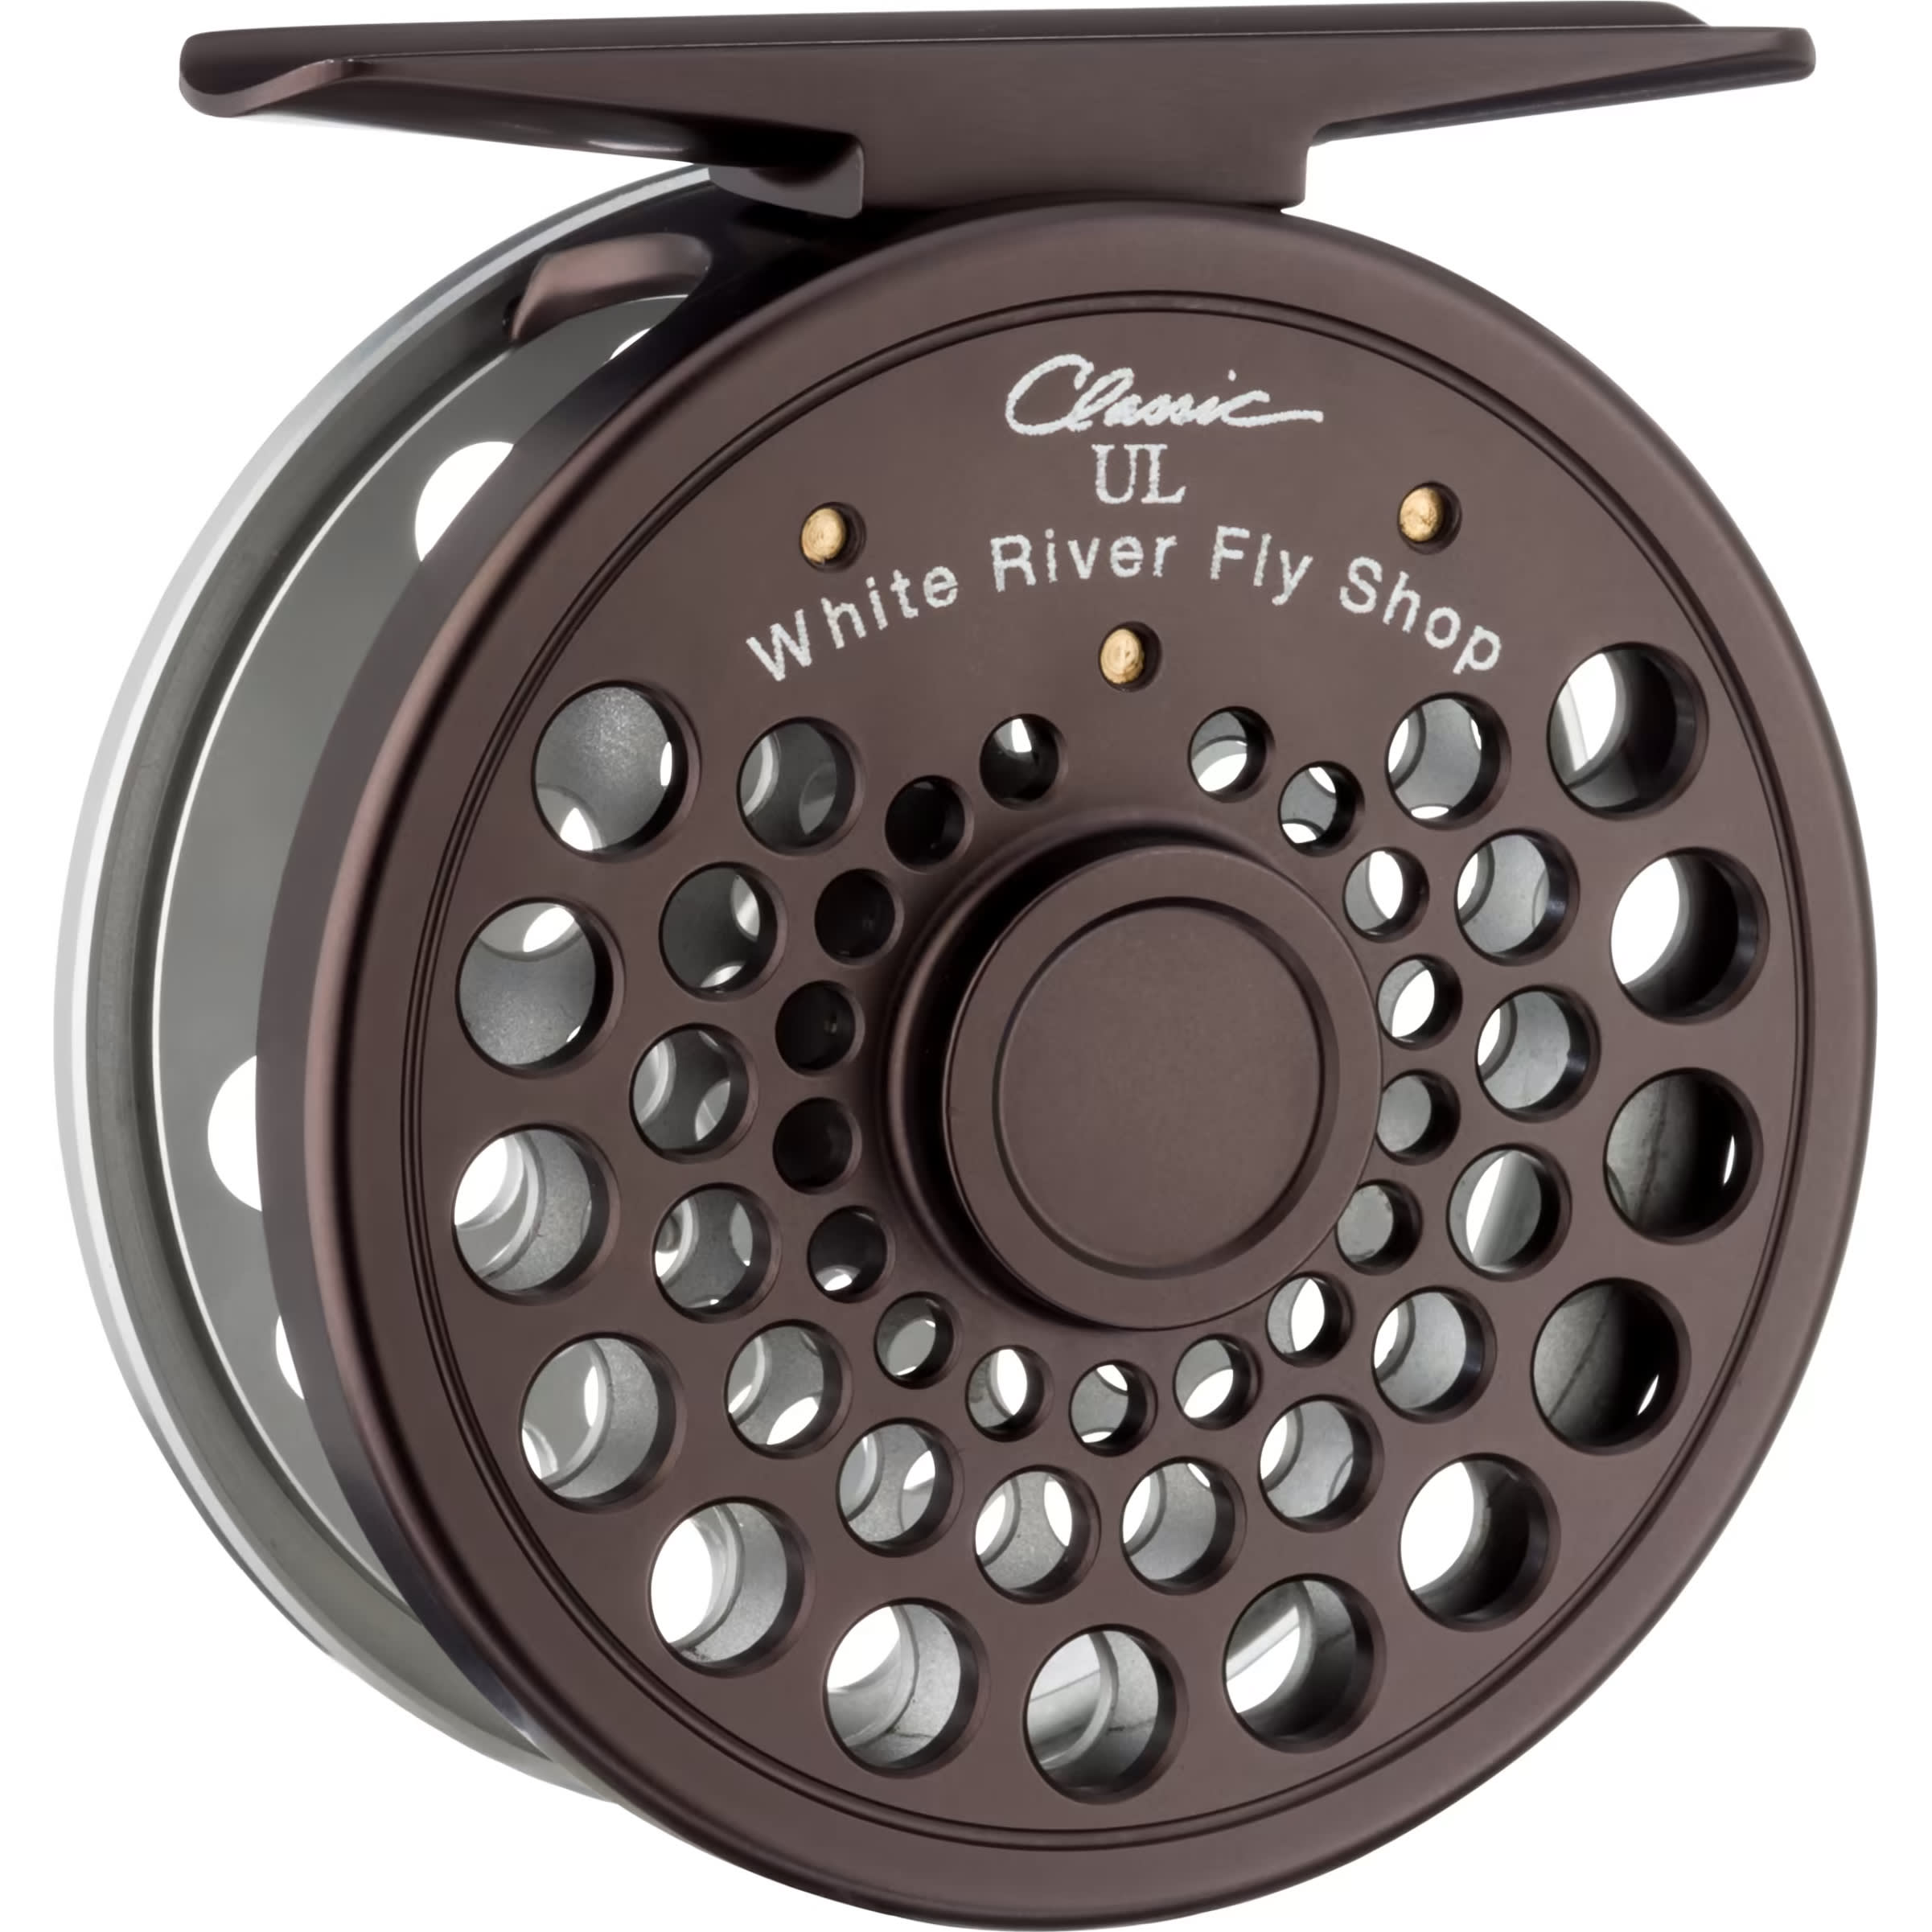 Spare pawls for a mg-7, Classic Fly Reels